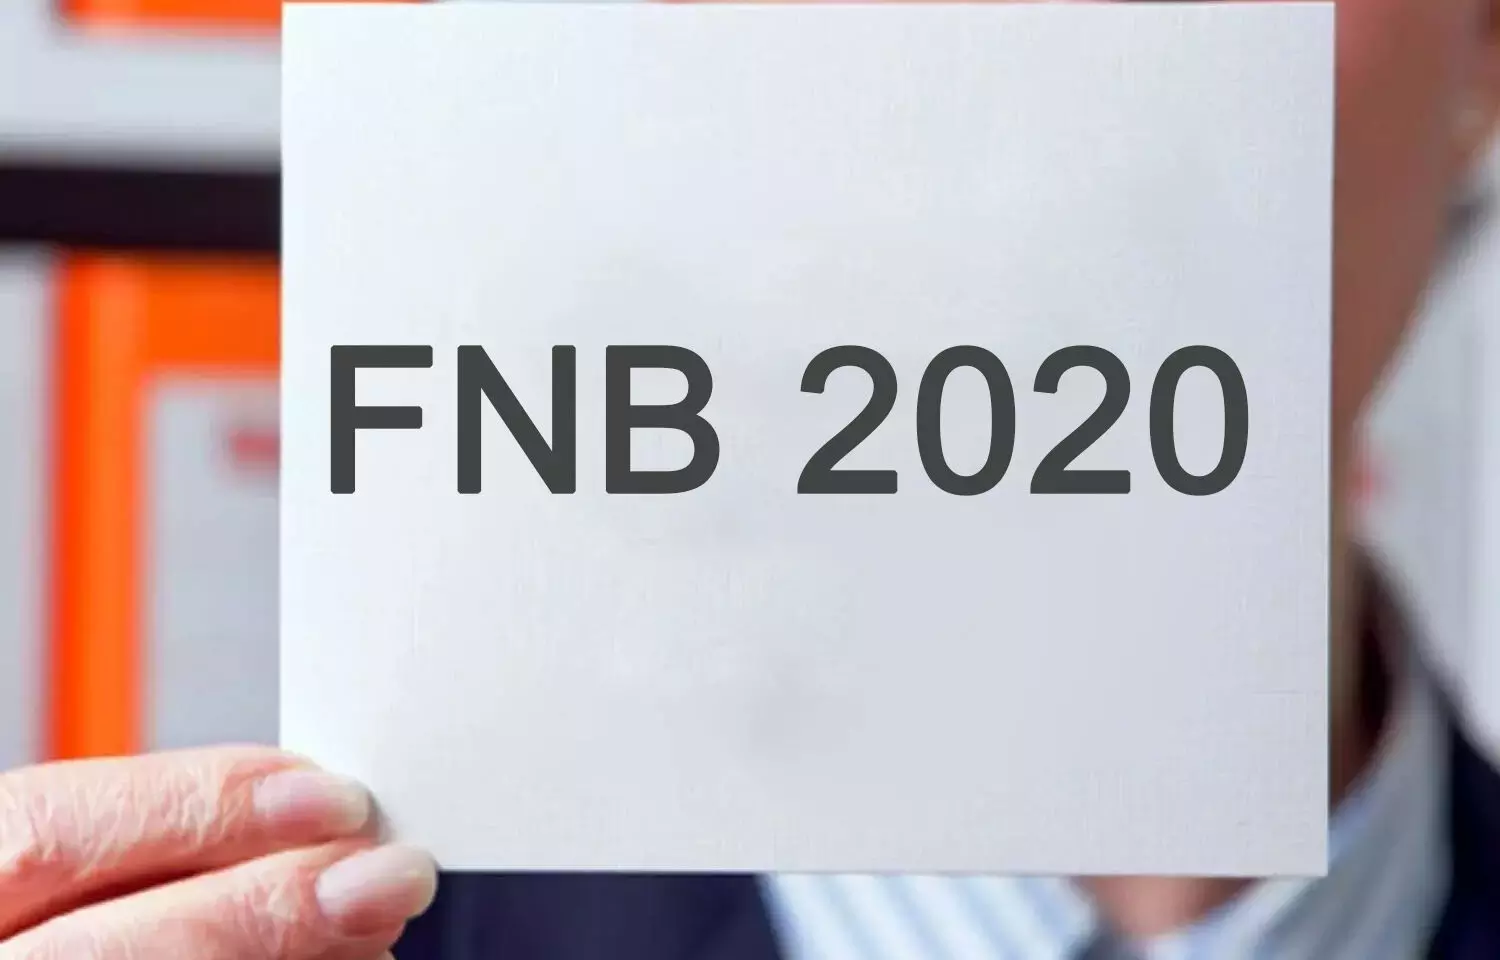 NBE Releases result Of Special Mop Up Round Of FNB Counselling, View here